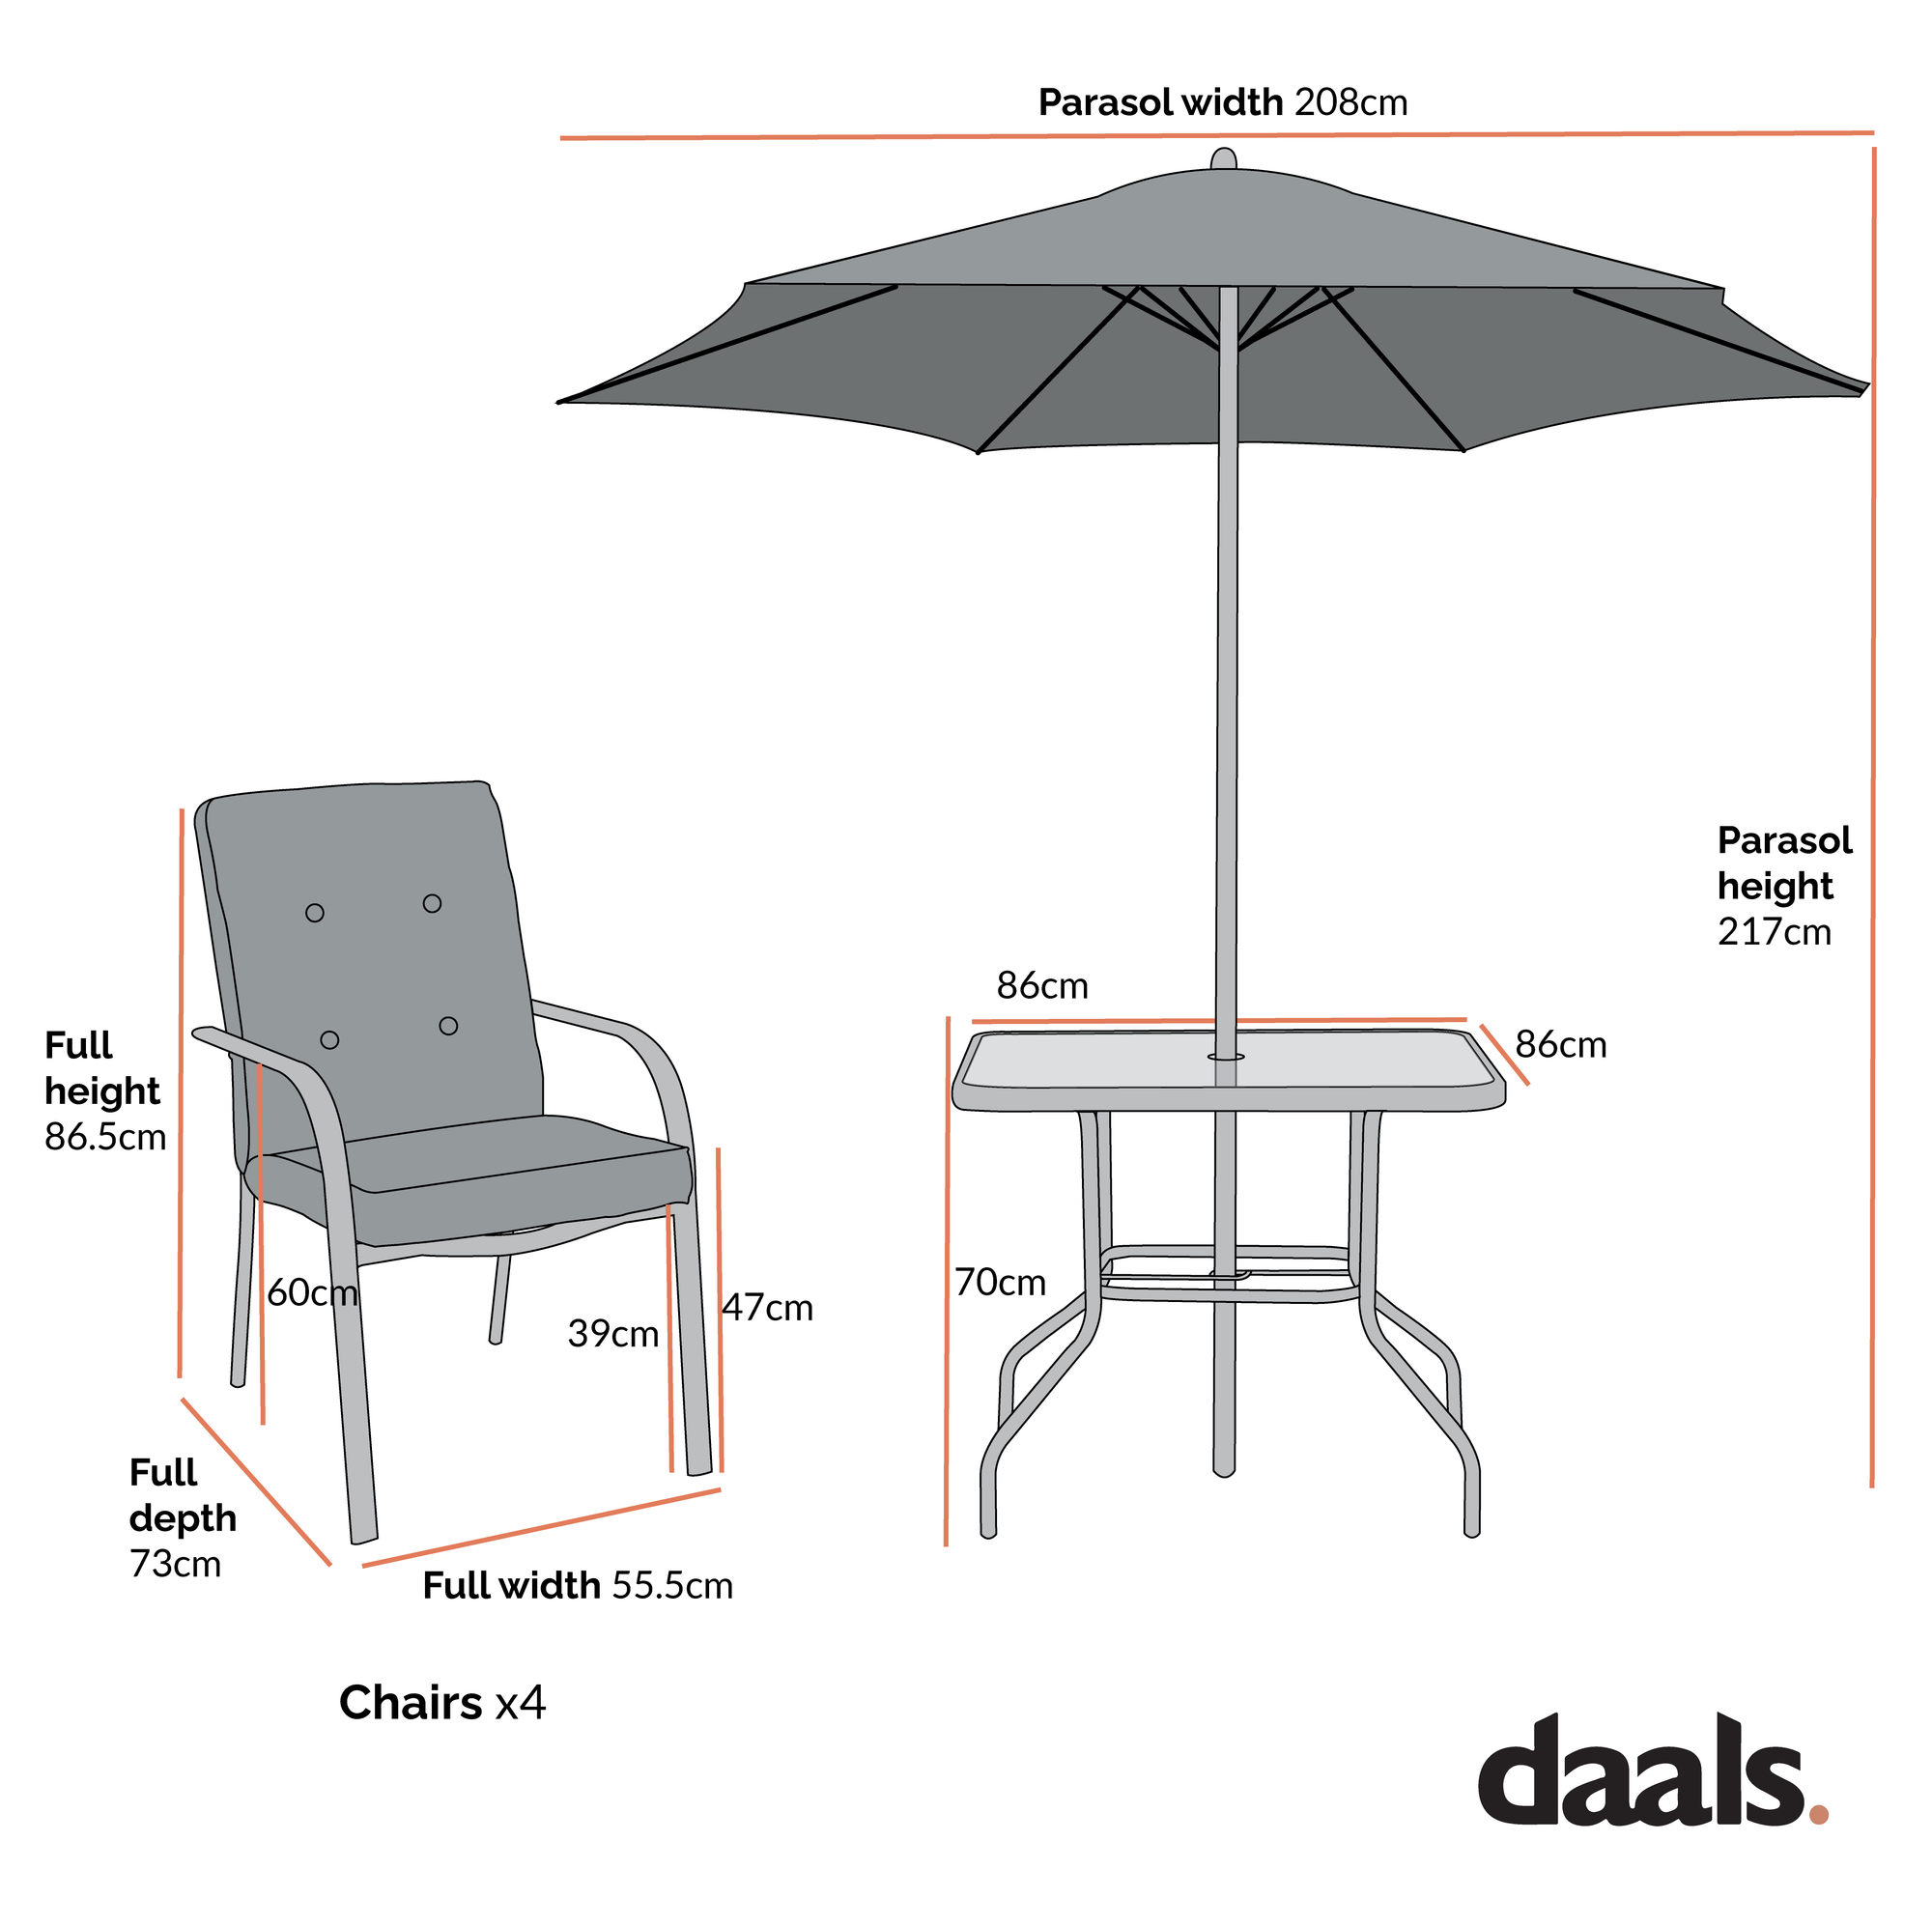 Champneys 4-Seater Steel and Fabric Outdoor Patio Dining Set with Parasol, Sage Green